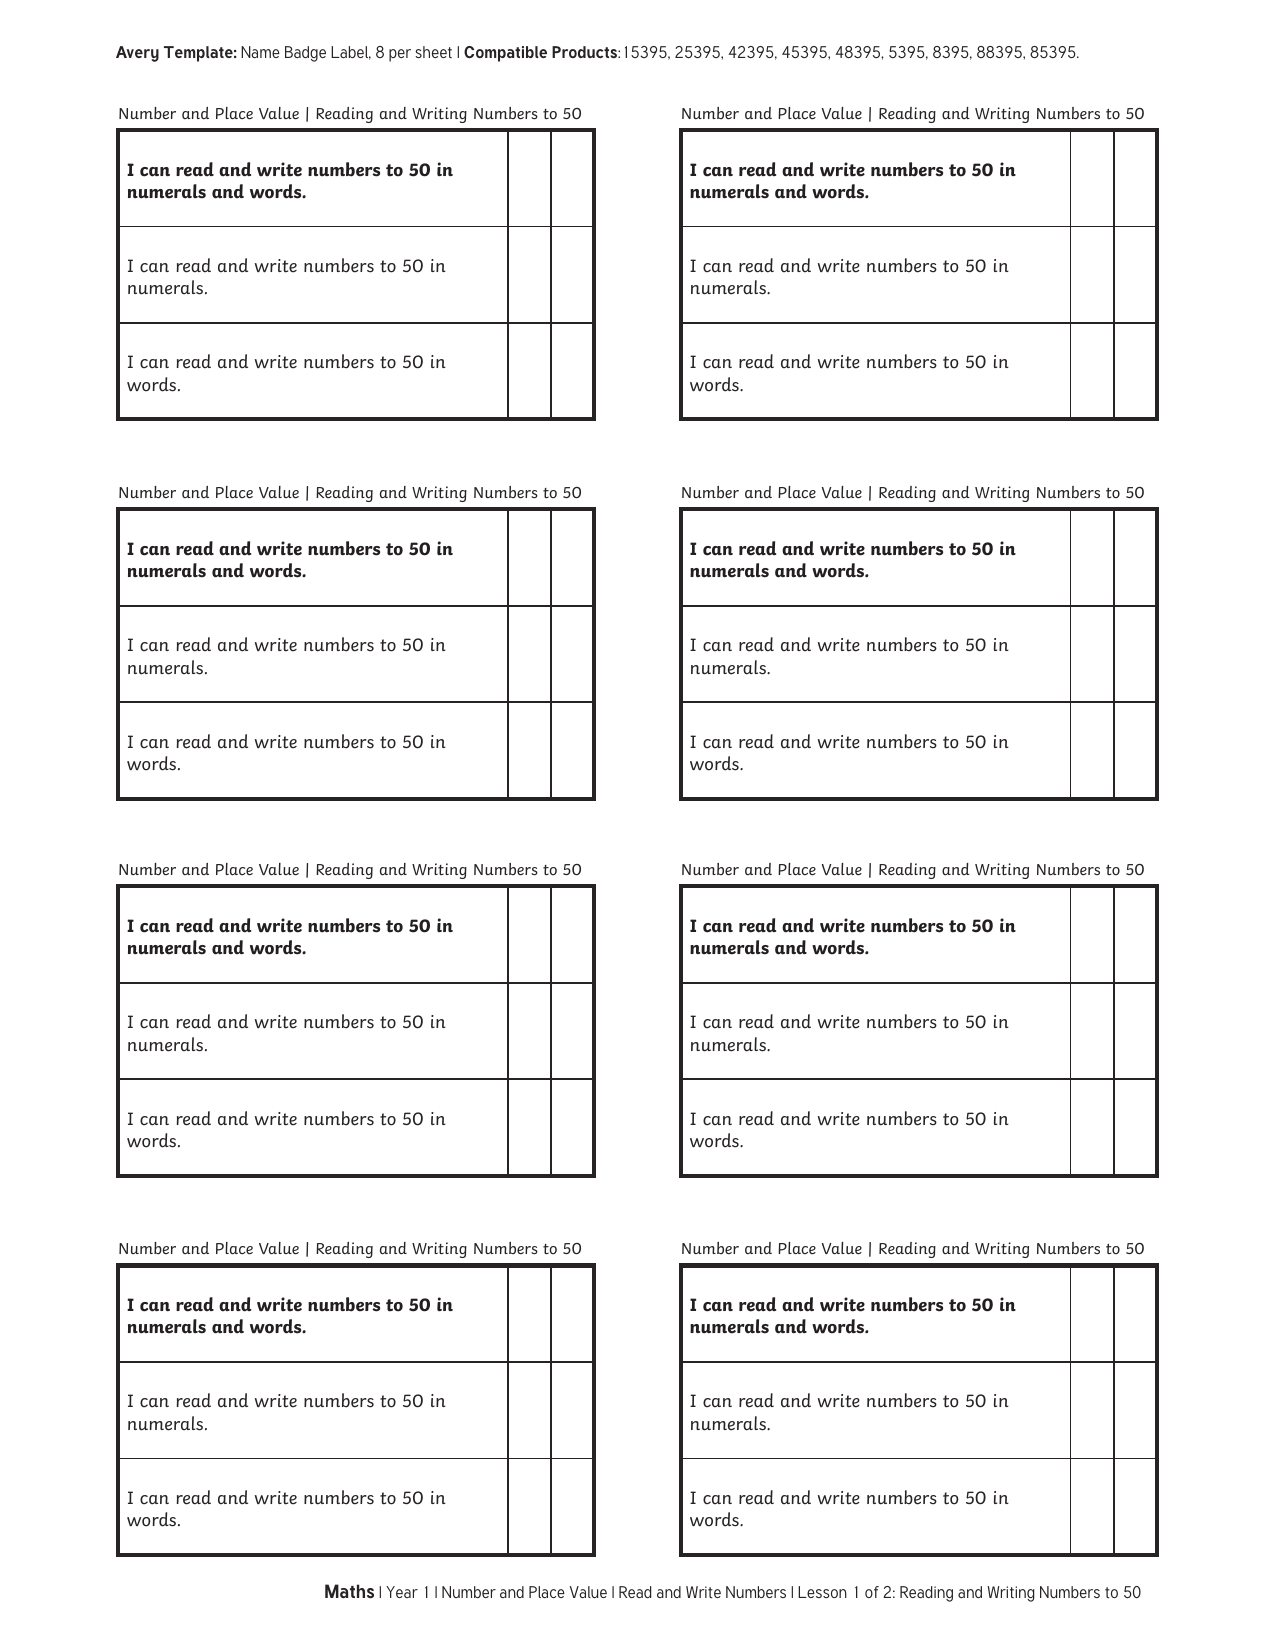 success-criteria-grids-reading-and-writing-numbers-to-50